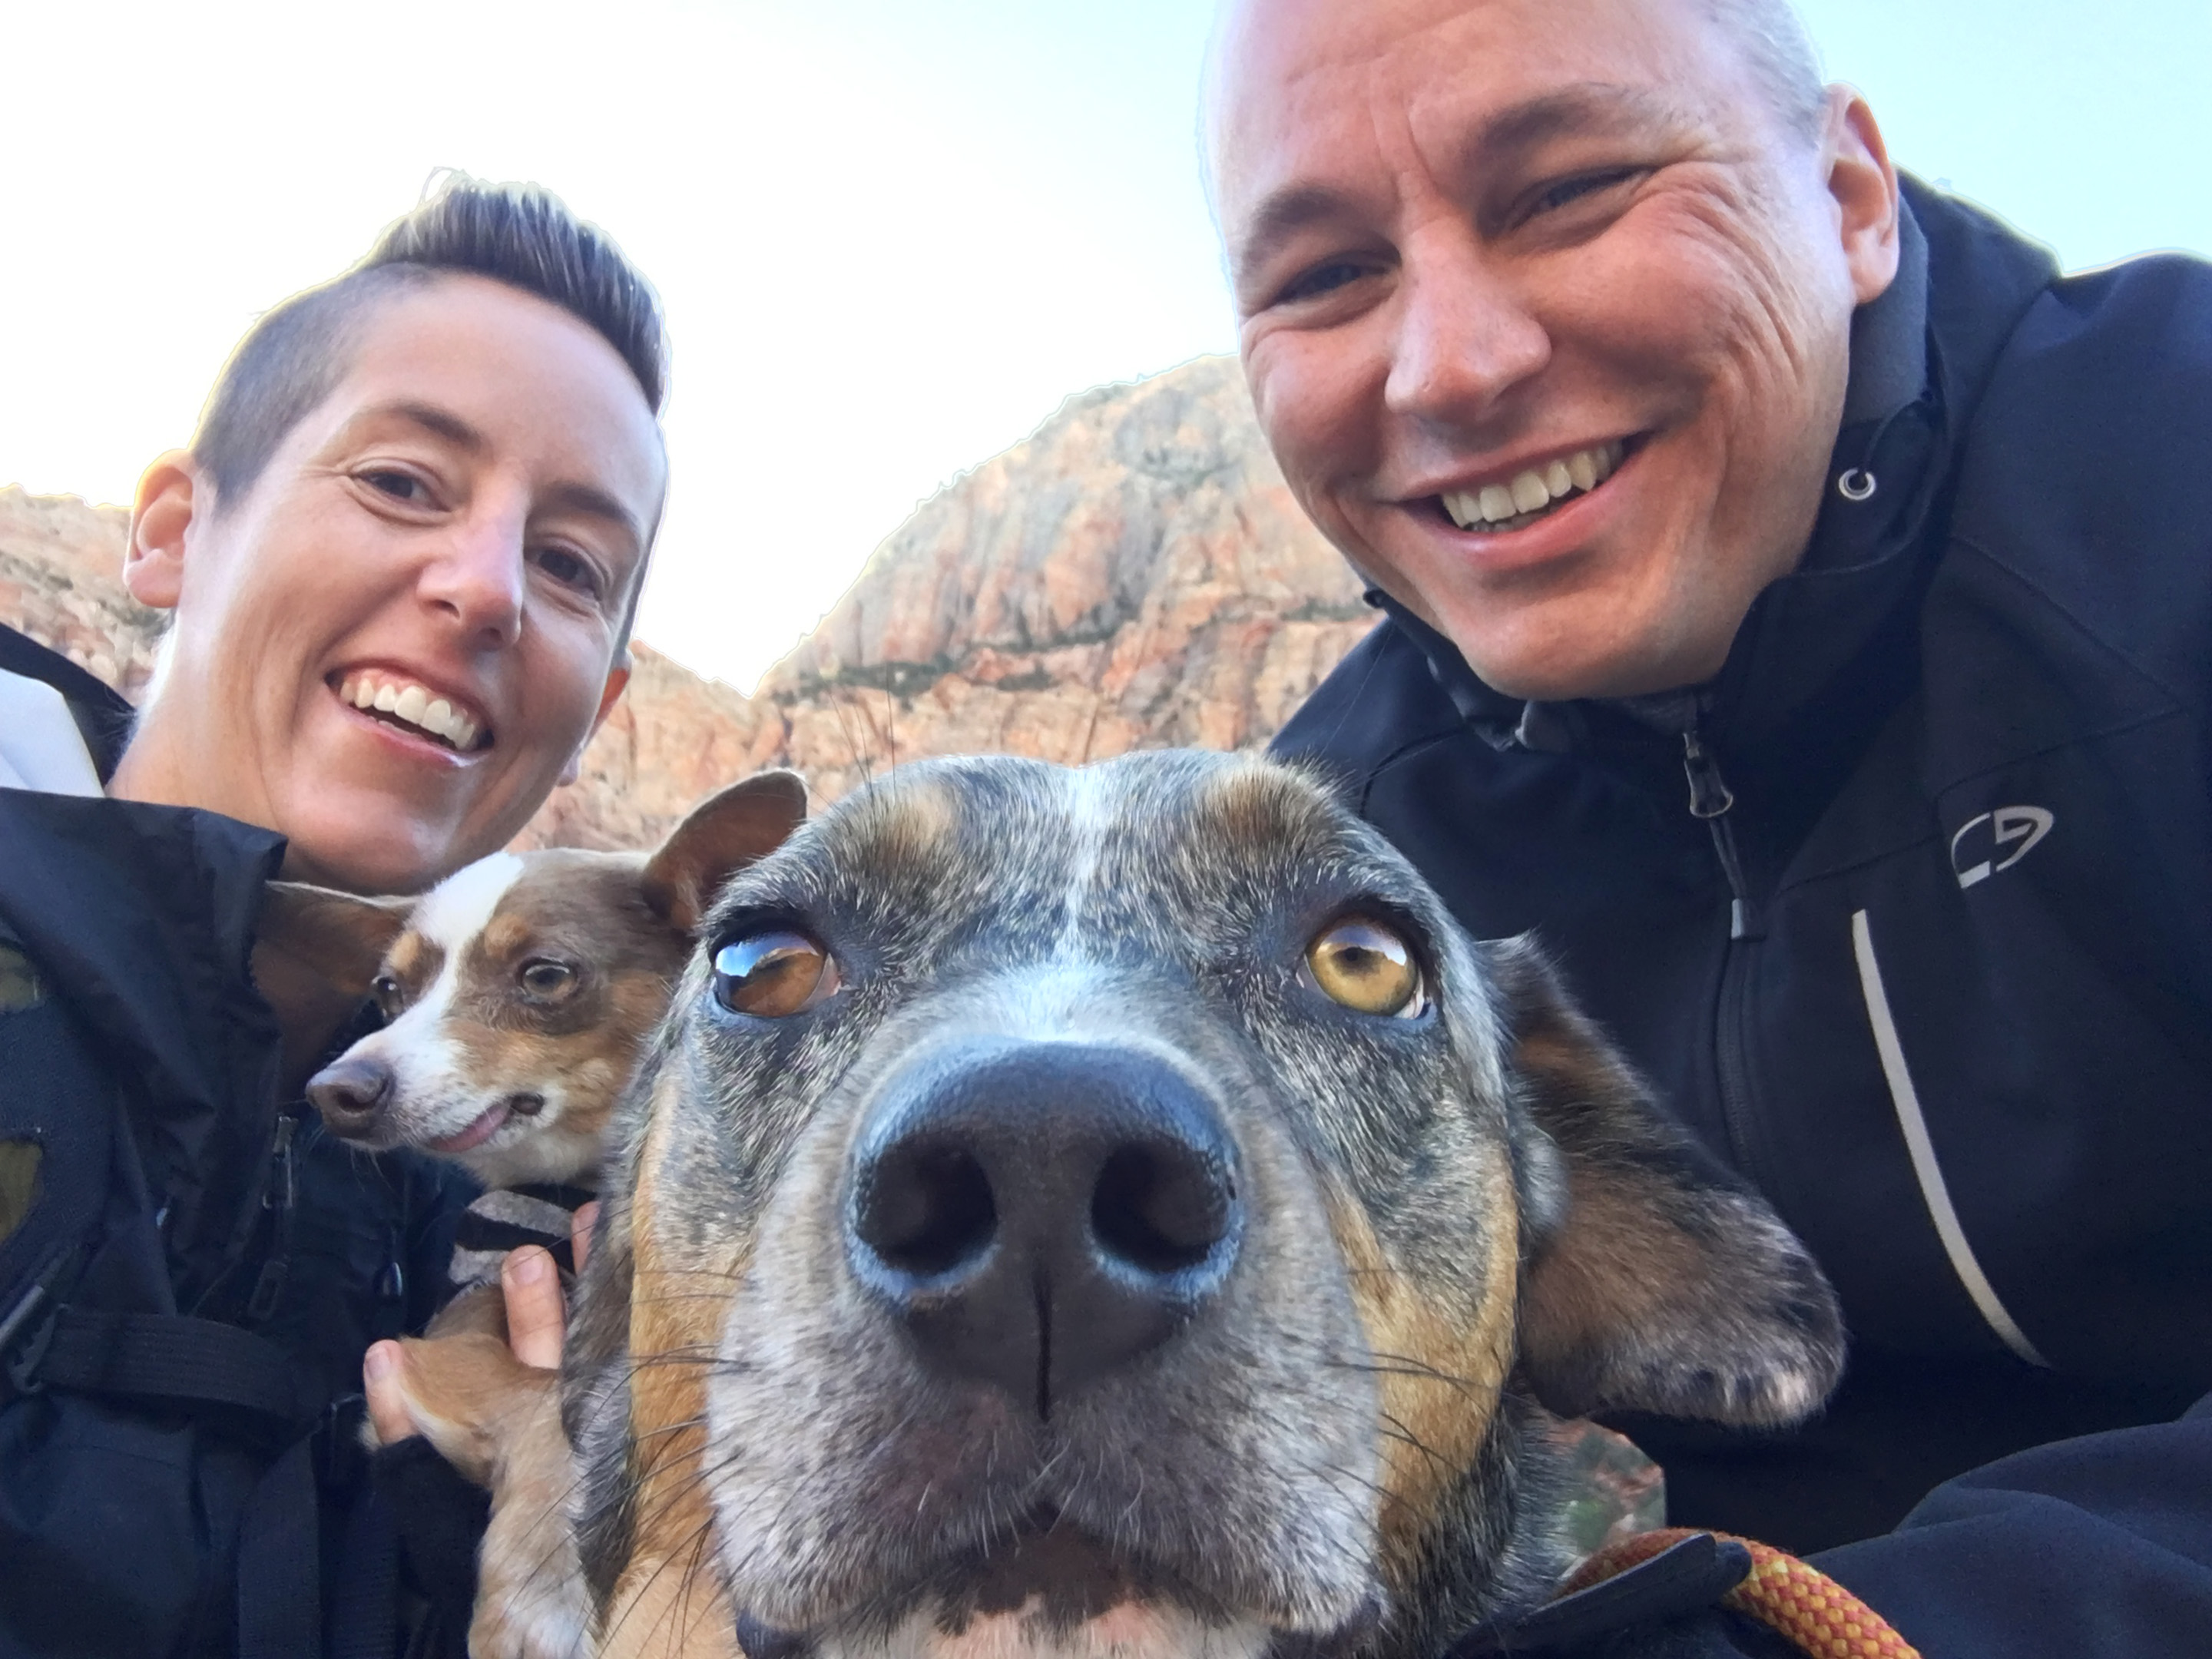 Family photo at Zion